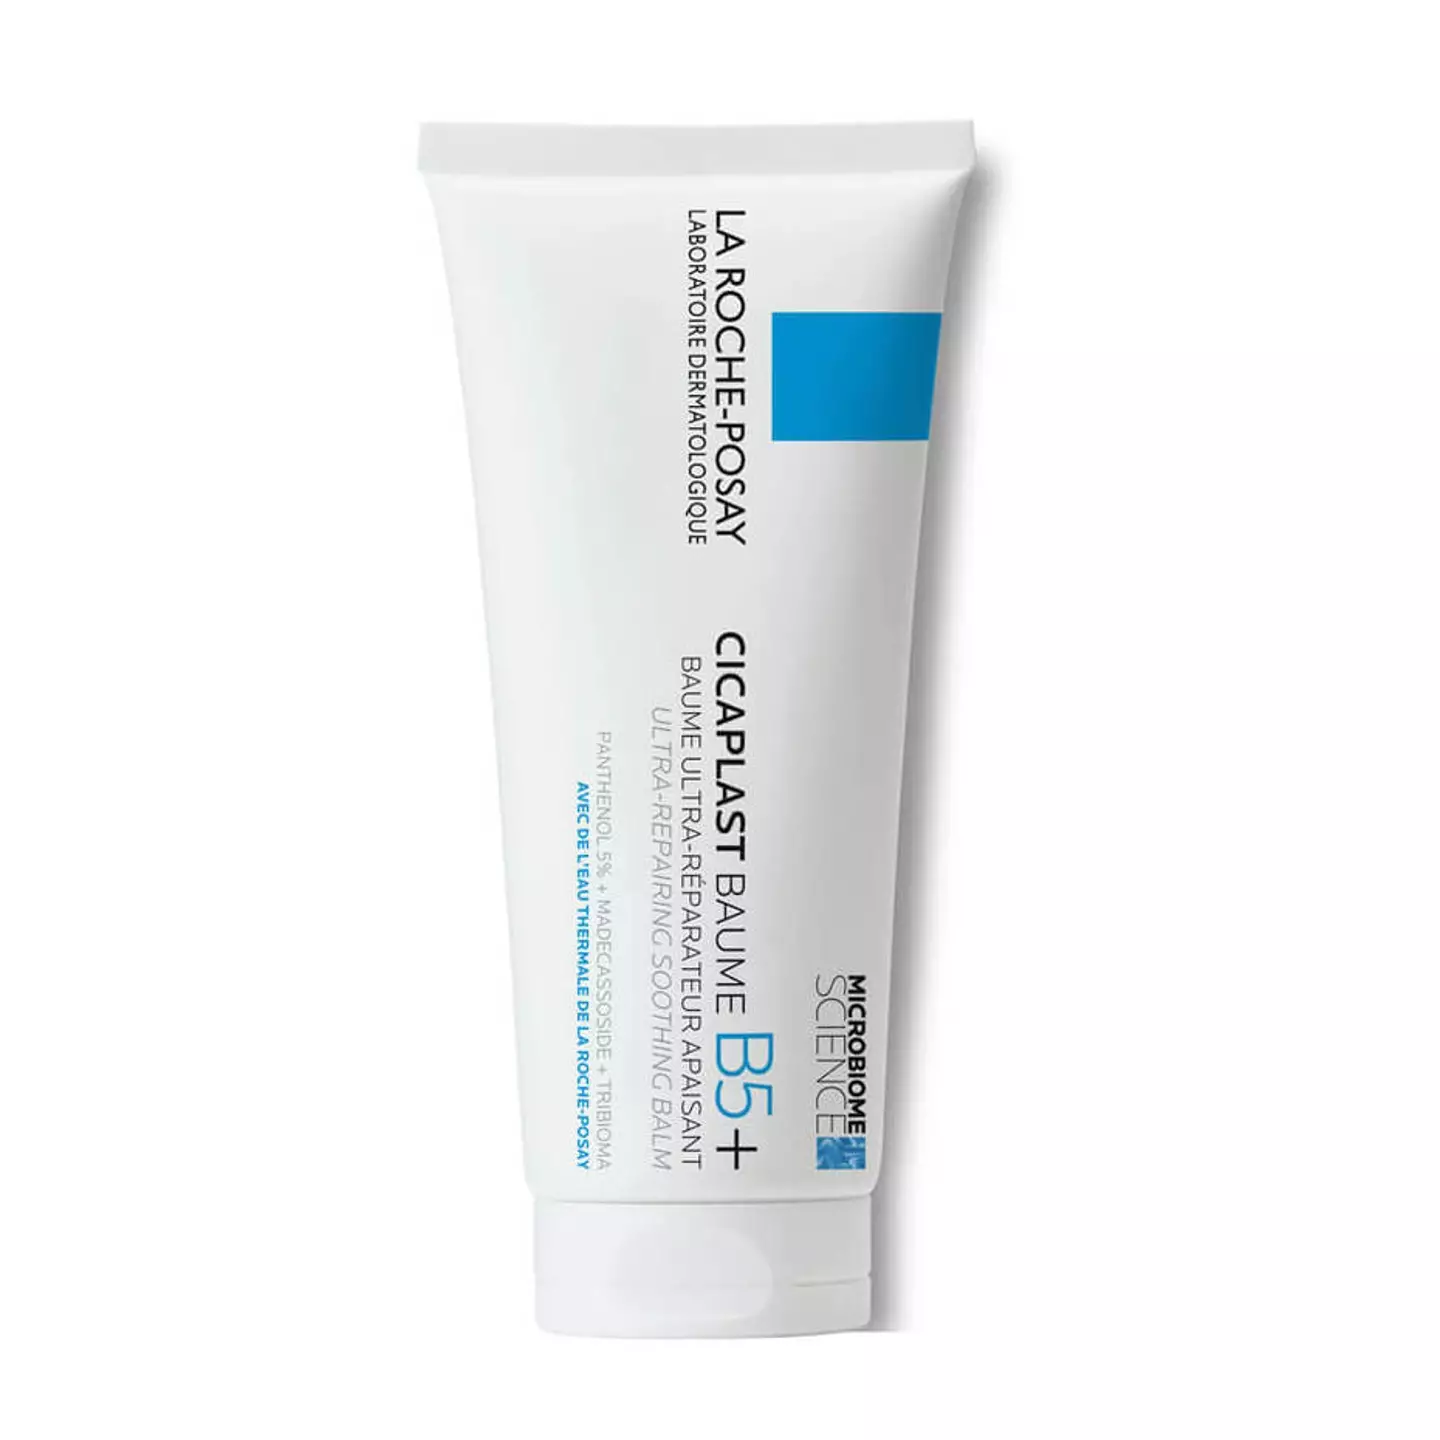 The La Roche Posay Cicaplast Balm is available at Boots.